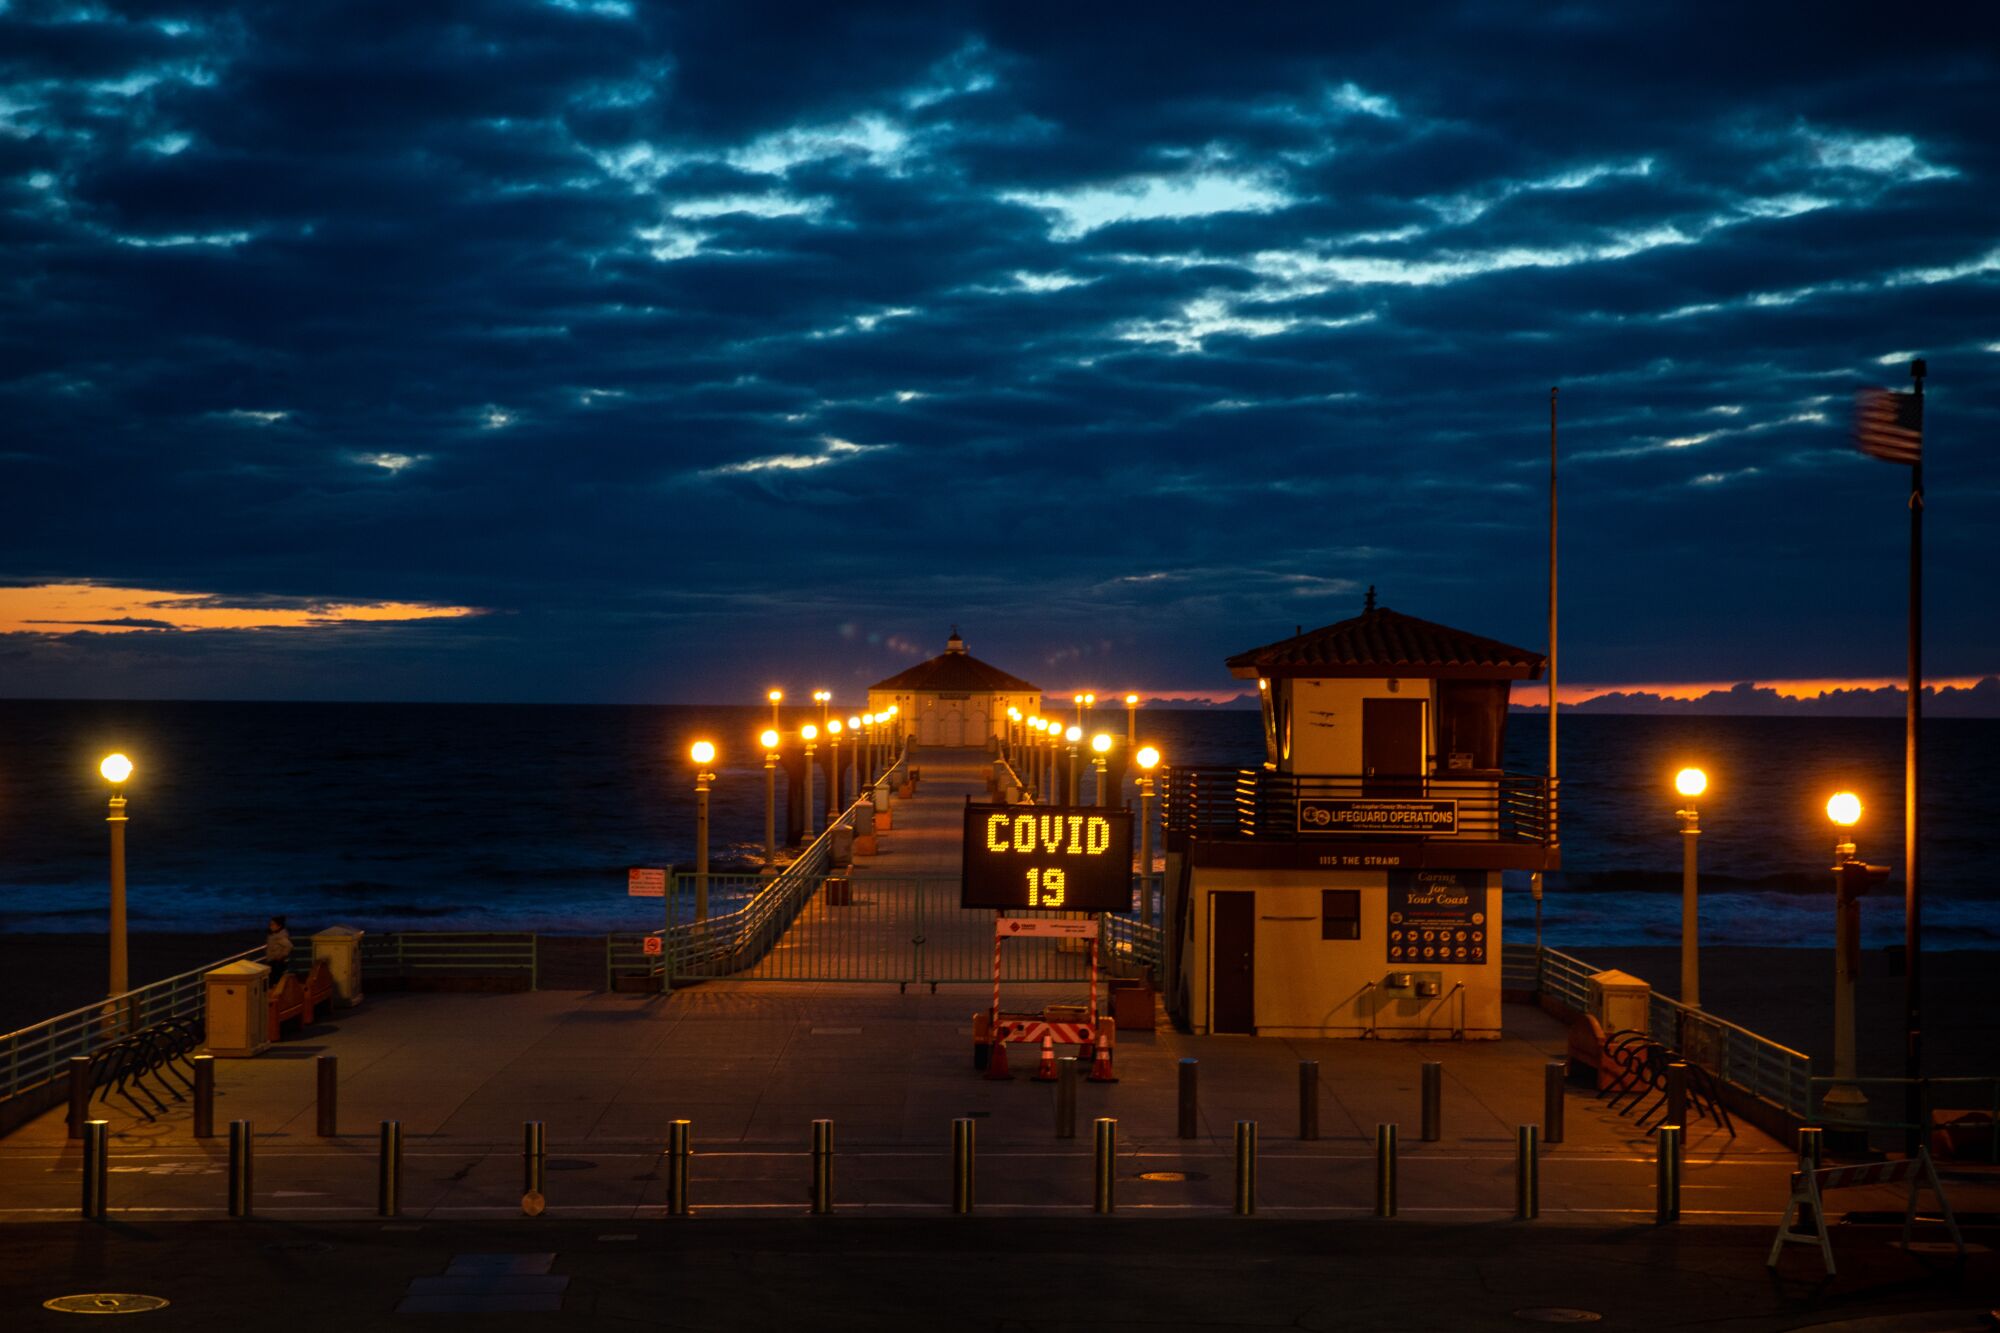 The Manhattan Beach Pier is locked, and a city sign explains why in three repeated messages: "Lot closed," "COVID-19" and "Social Distancing."